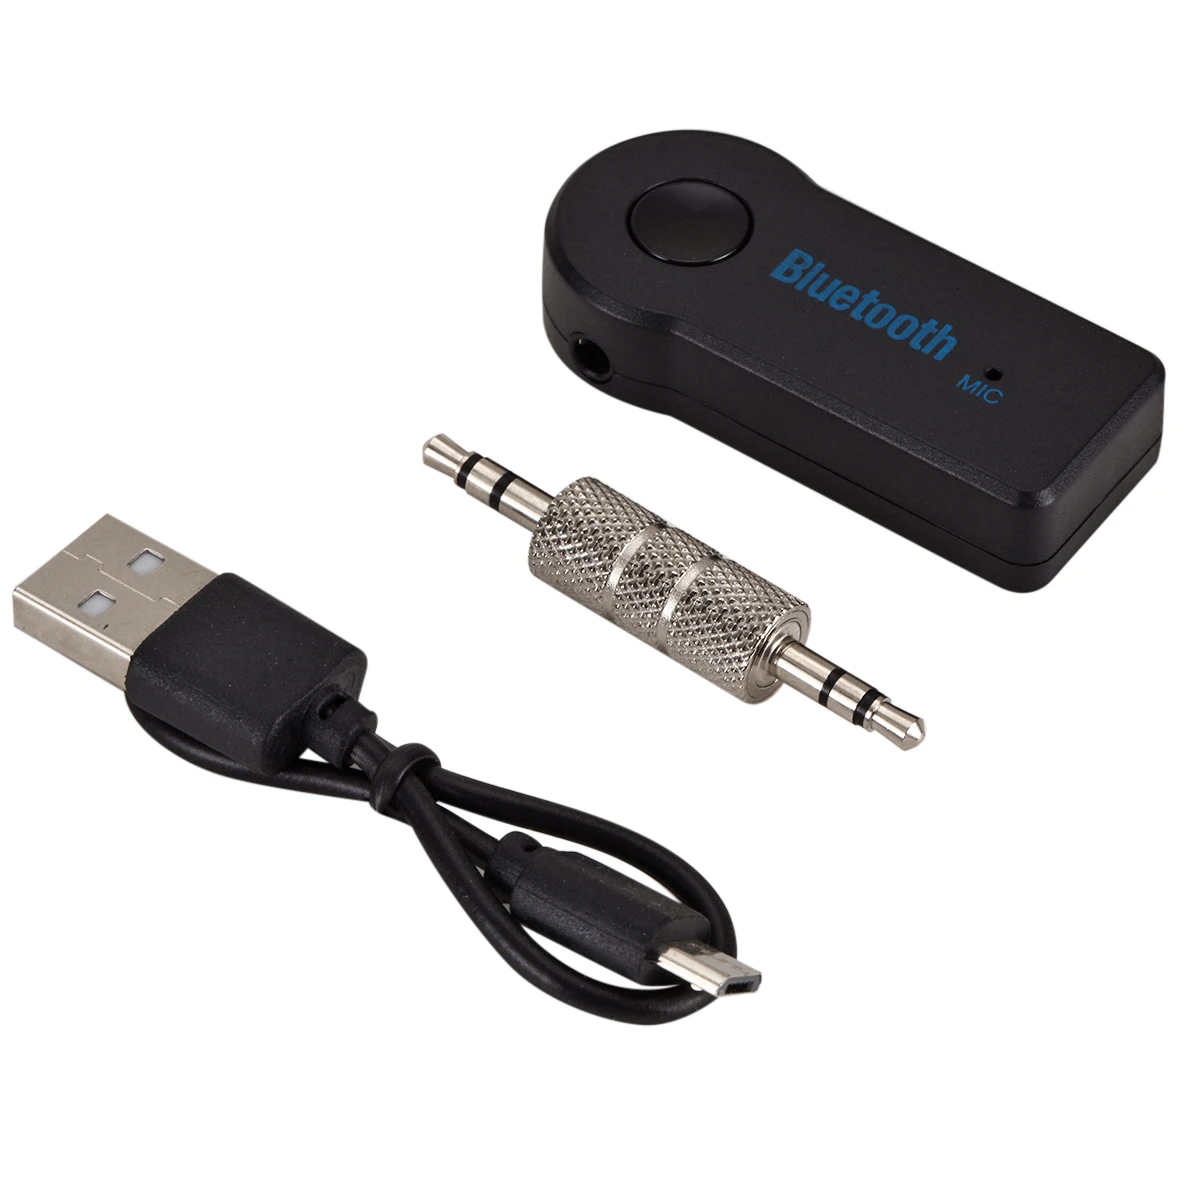 Wireless Bluetooth Car Kit Hands free 3.5mm Jack AUX Audio Receiver Adapter Hot 